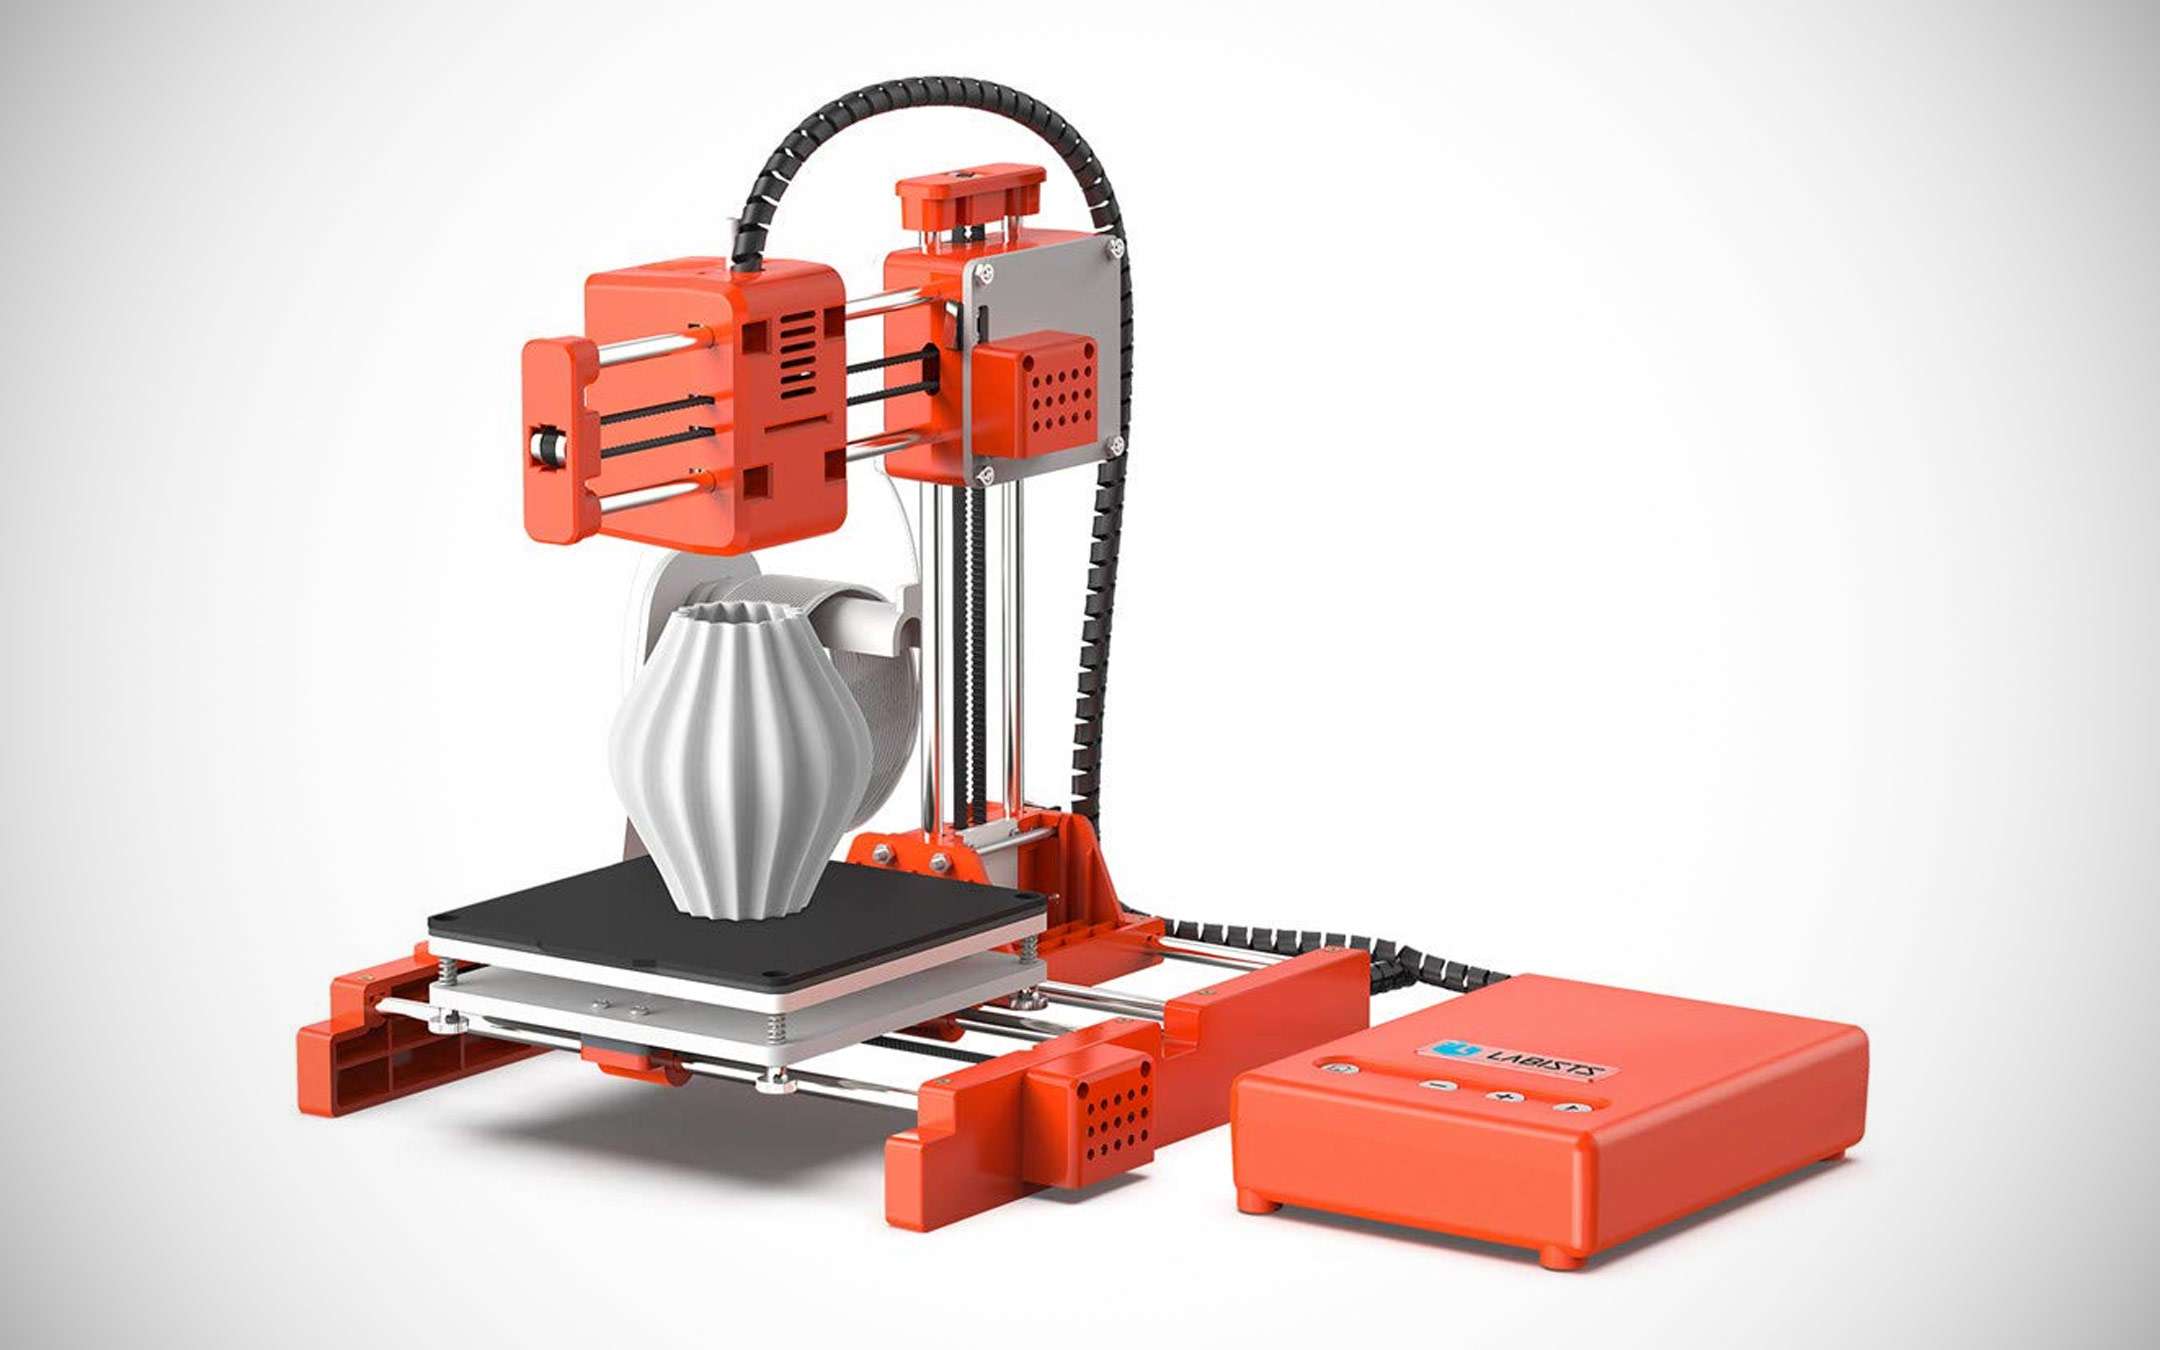 A 3D printer for just over 100 euros on Amazon